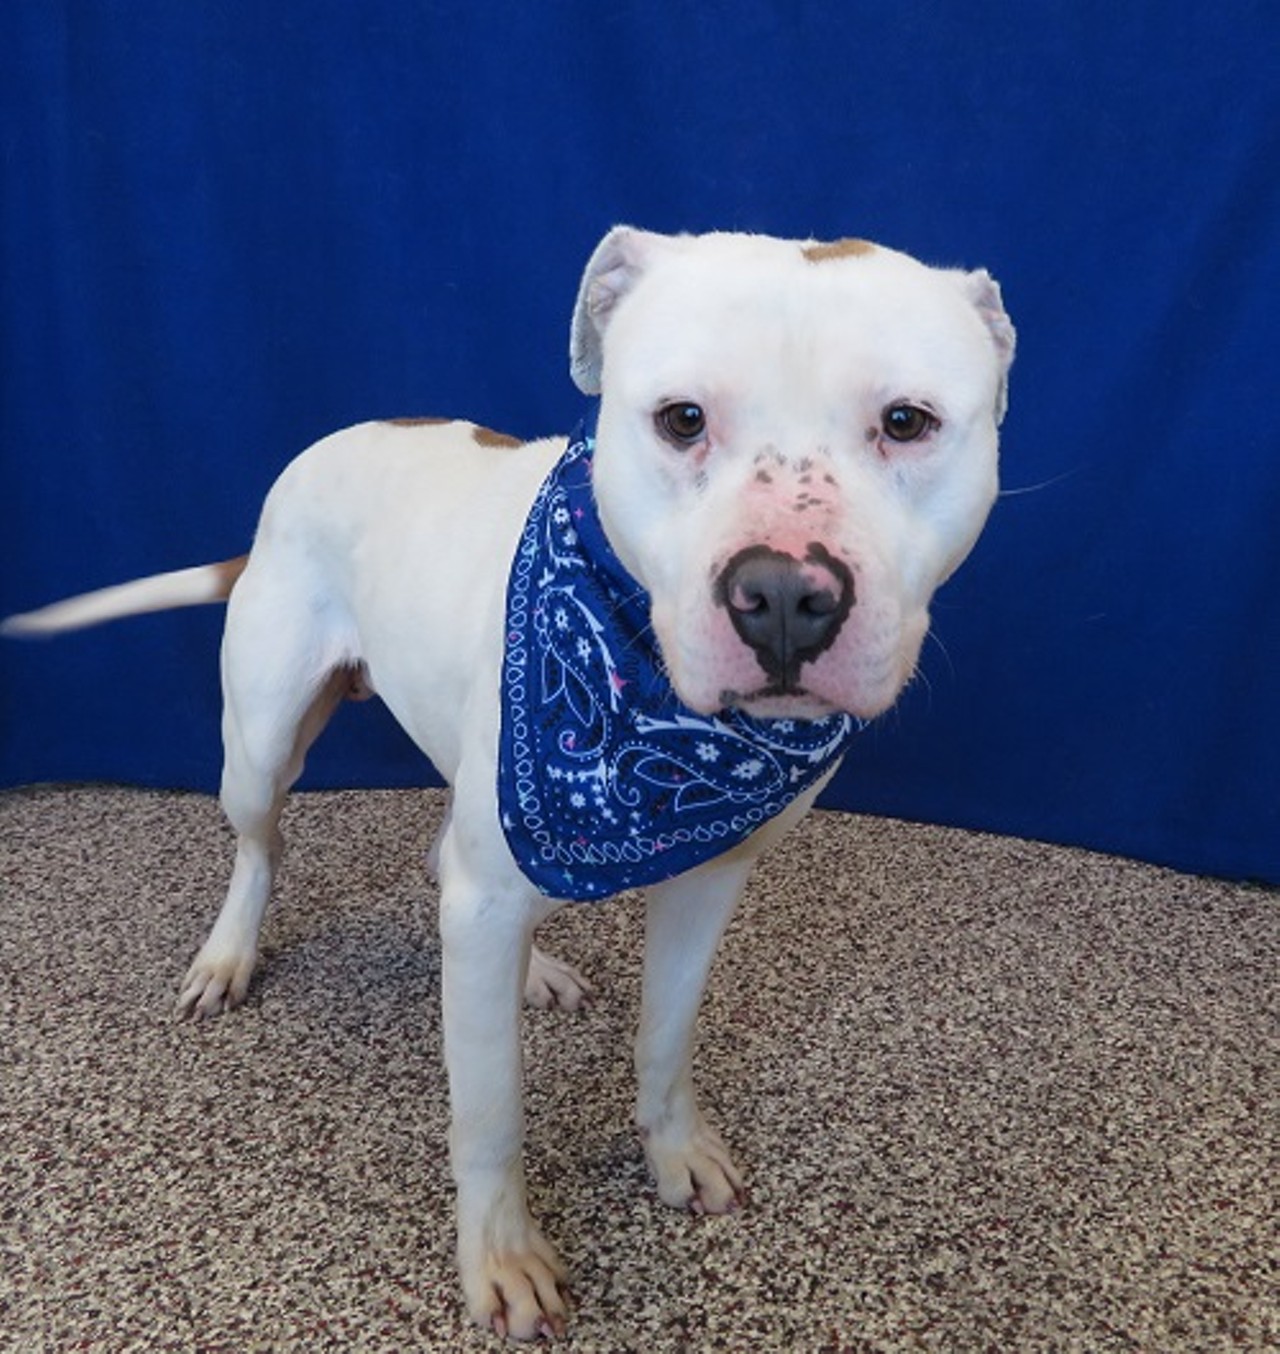 NAME: Triton
GENDER: Male
BREED: Pit Bull
AGE: 2 years
WEIGHT: 55 pounds
SPECIAL CONSIDERATIONS: Prefers a home with older children
REASON I CAME TO MHS: Rescued in Detroit
LOCATION: Mackey Center for Animal Care in Detroit
ID NUMBER: 866947